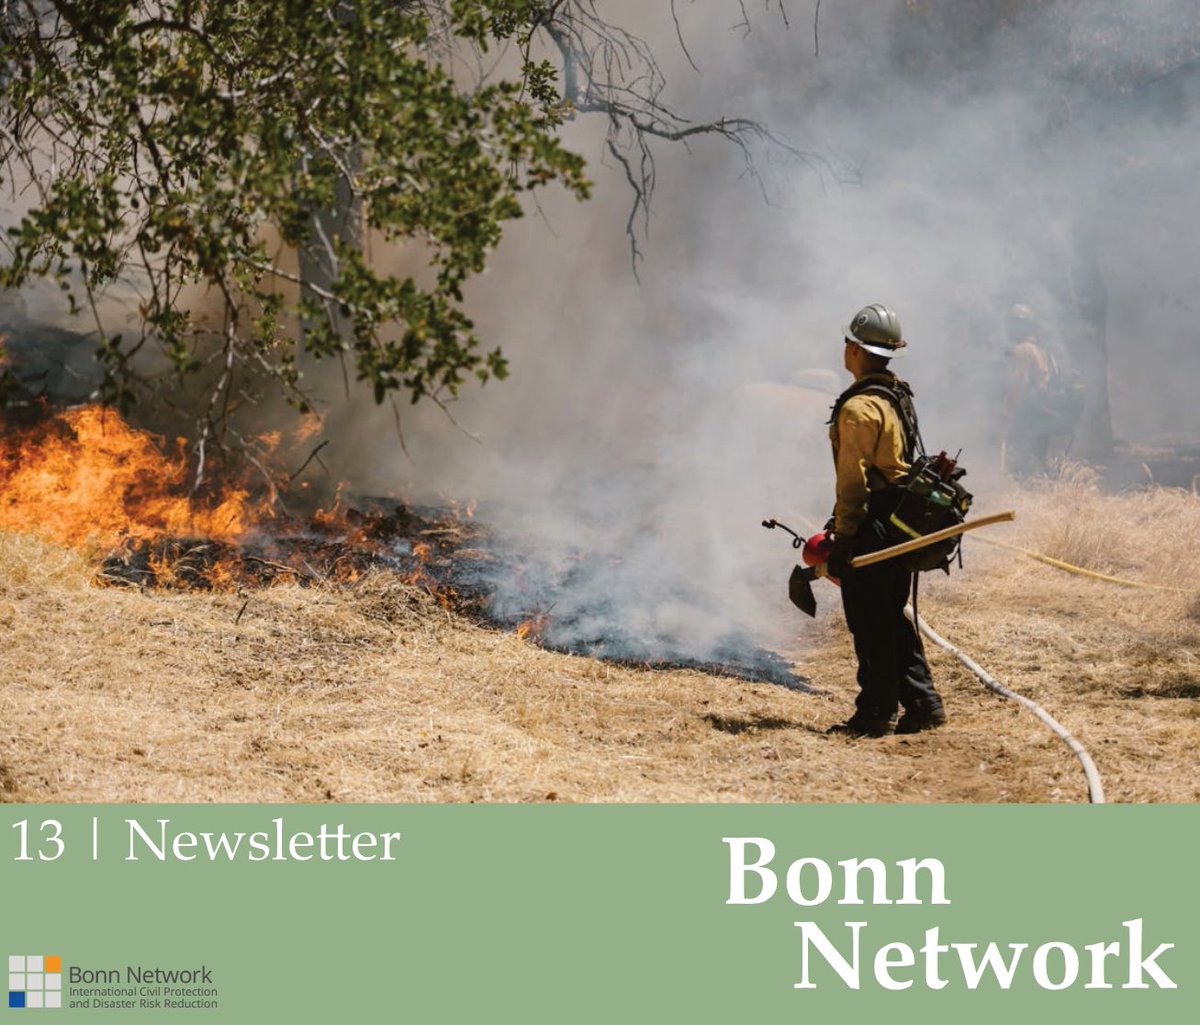 📢Our latest Newsletter is online Just in time for some holiday reading 📚bonner-netzwerk-int-kats.org/newsletter (both English & German) With contributions by our partners @UNSPIDER_con @DKKV_GermanDRR @Fraunhofer_INT @GIUB_Research @BBK_Bund @europeanforest